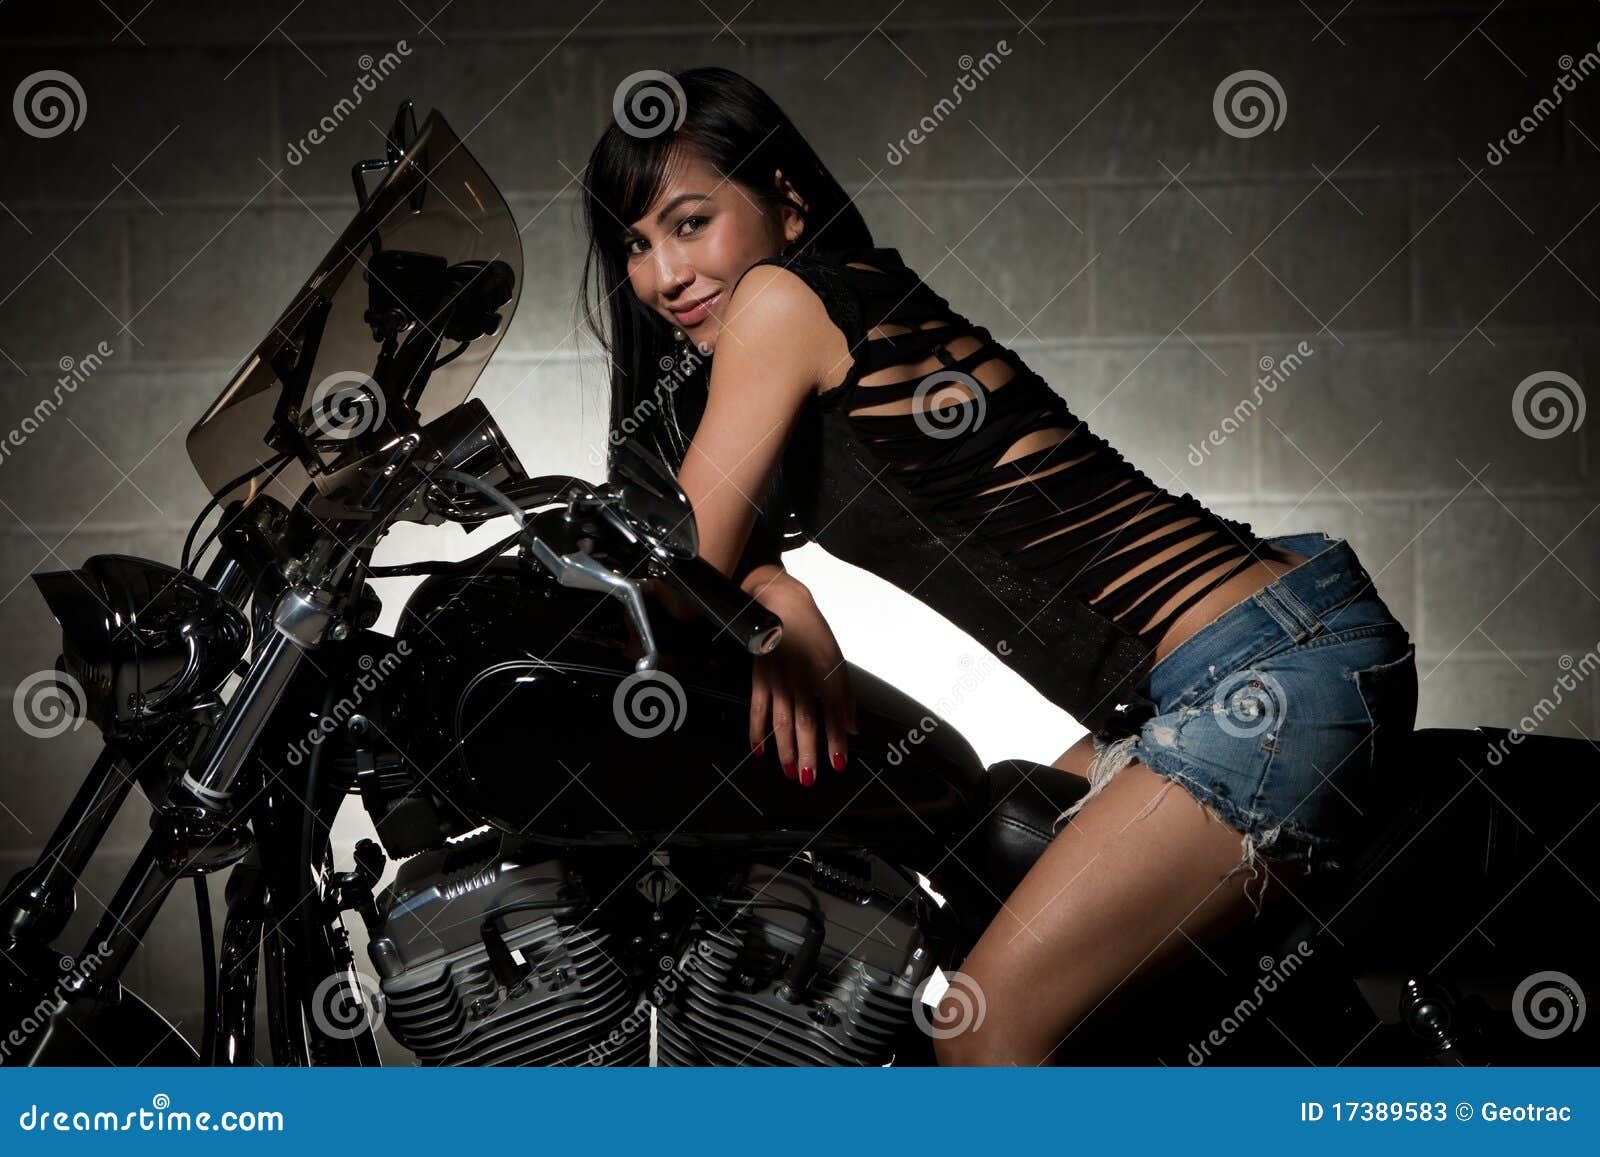 attractive thirties asian woman riding motorcycle